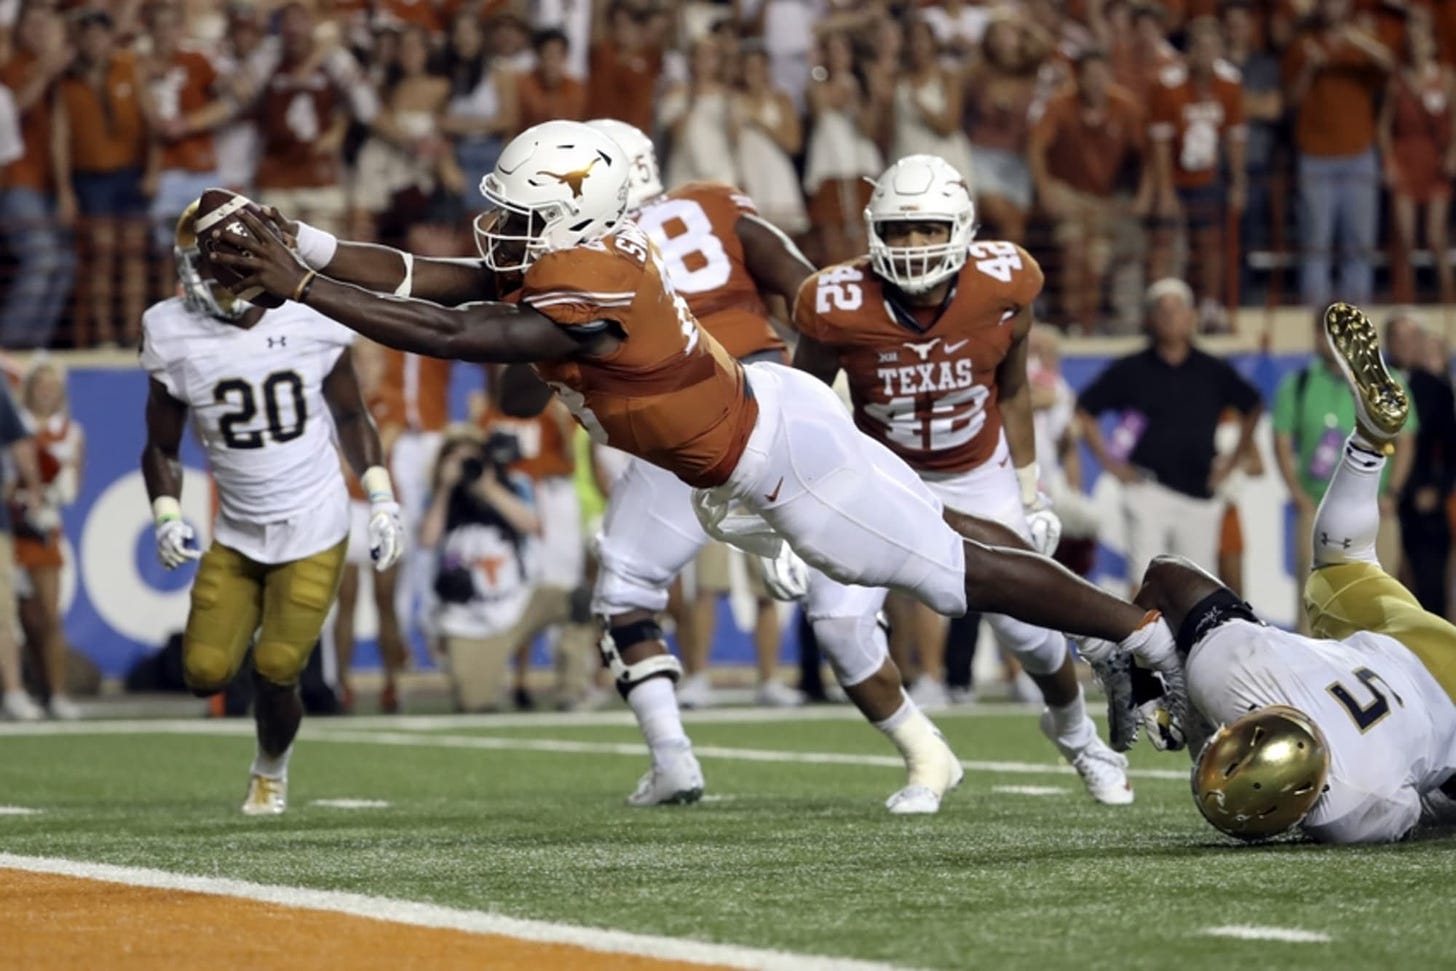 Texas Football: Notre Dame Win Still Significant for Longhorns